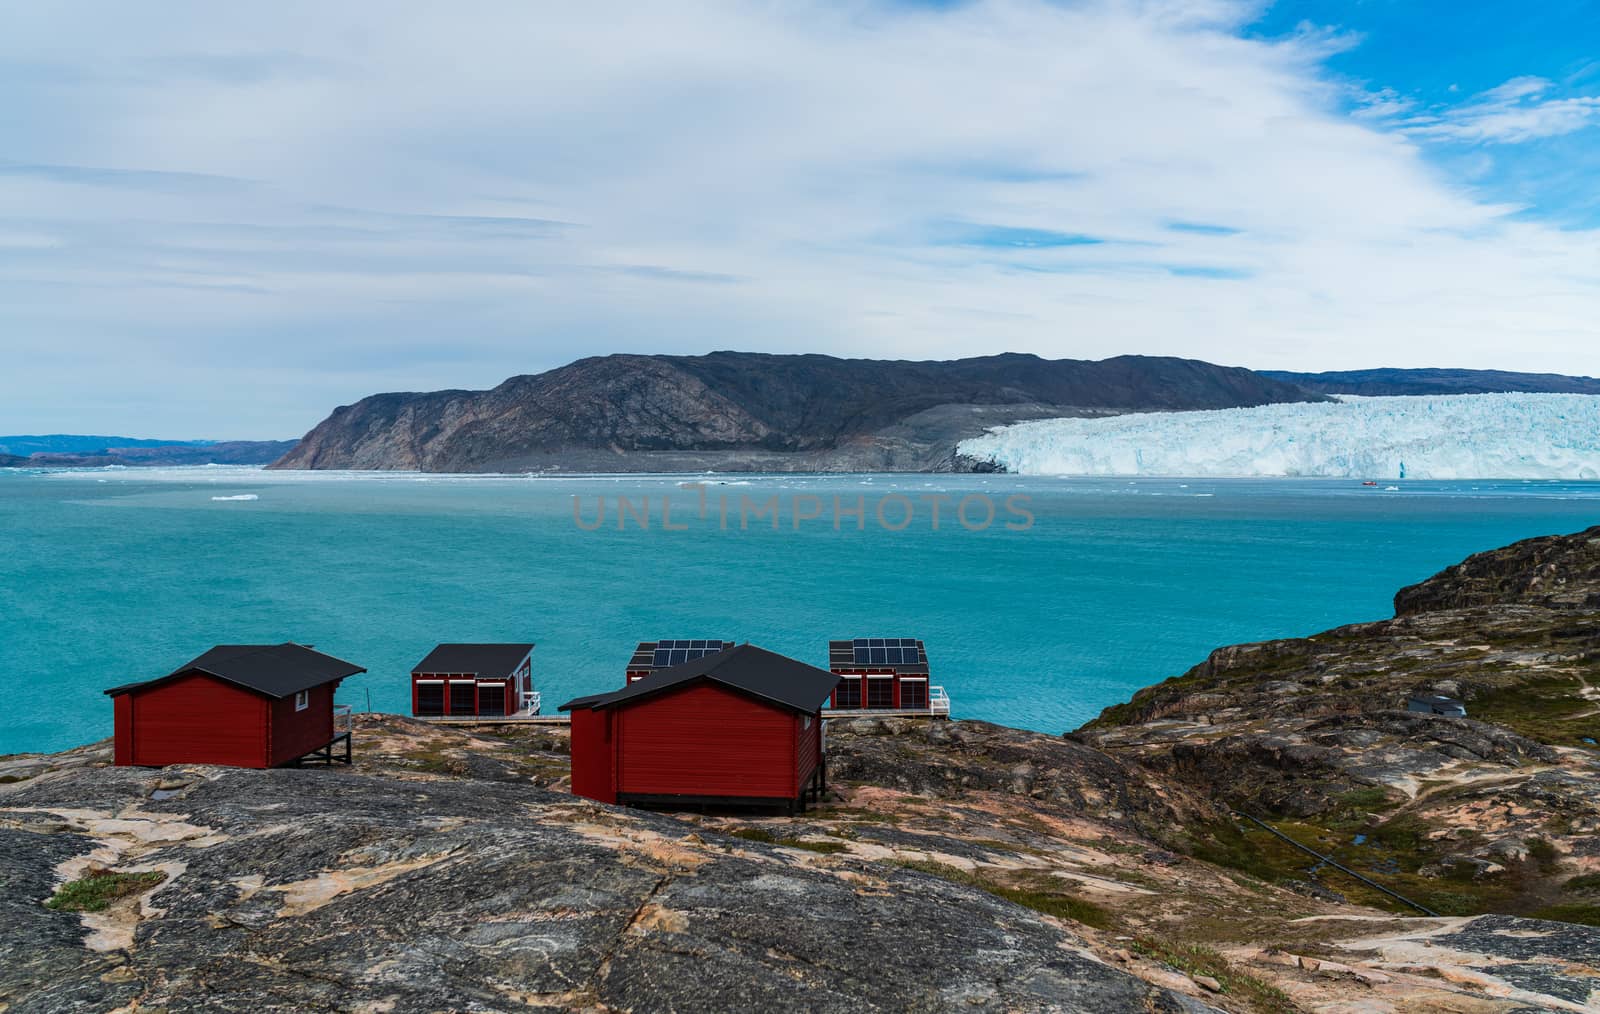 Greenland glacier nature landscape with famous Eqi glacier and lodge cabins by Maridav